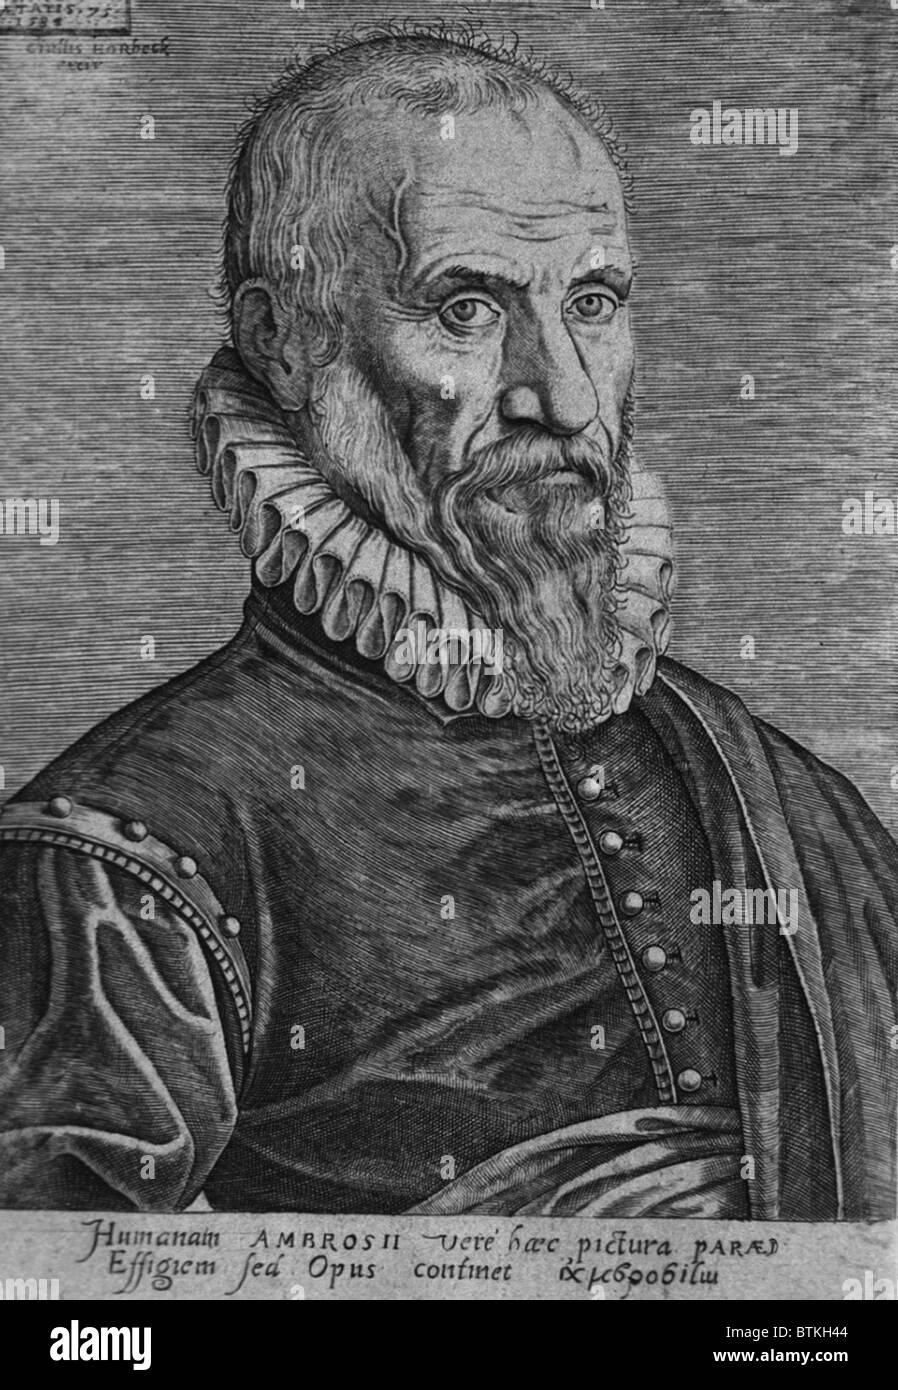 Ambroise Pare, the great 16th century surgeon, developed surgical techniques, invented instruments for battlefield operations. He is considered 'The Father of Modern Surgery.' Ca. 1570. Stock Photo